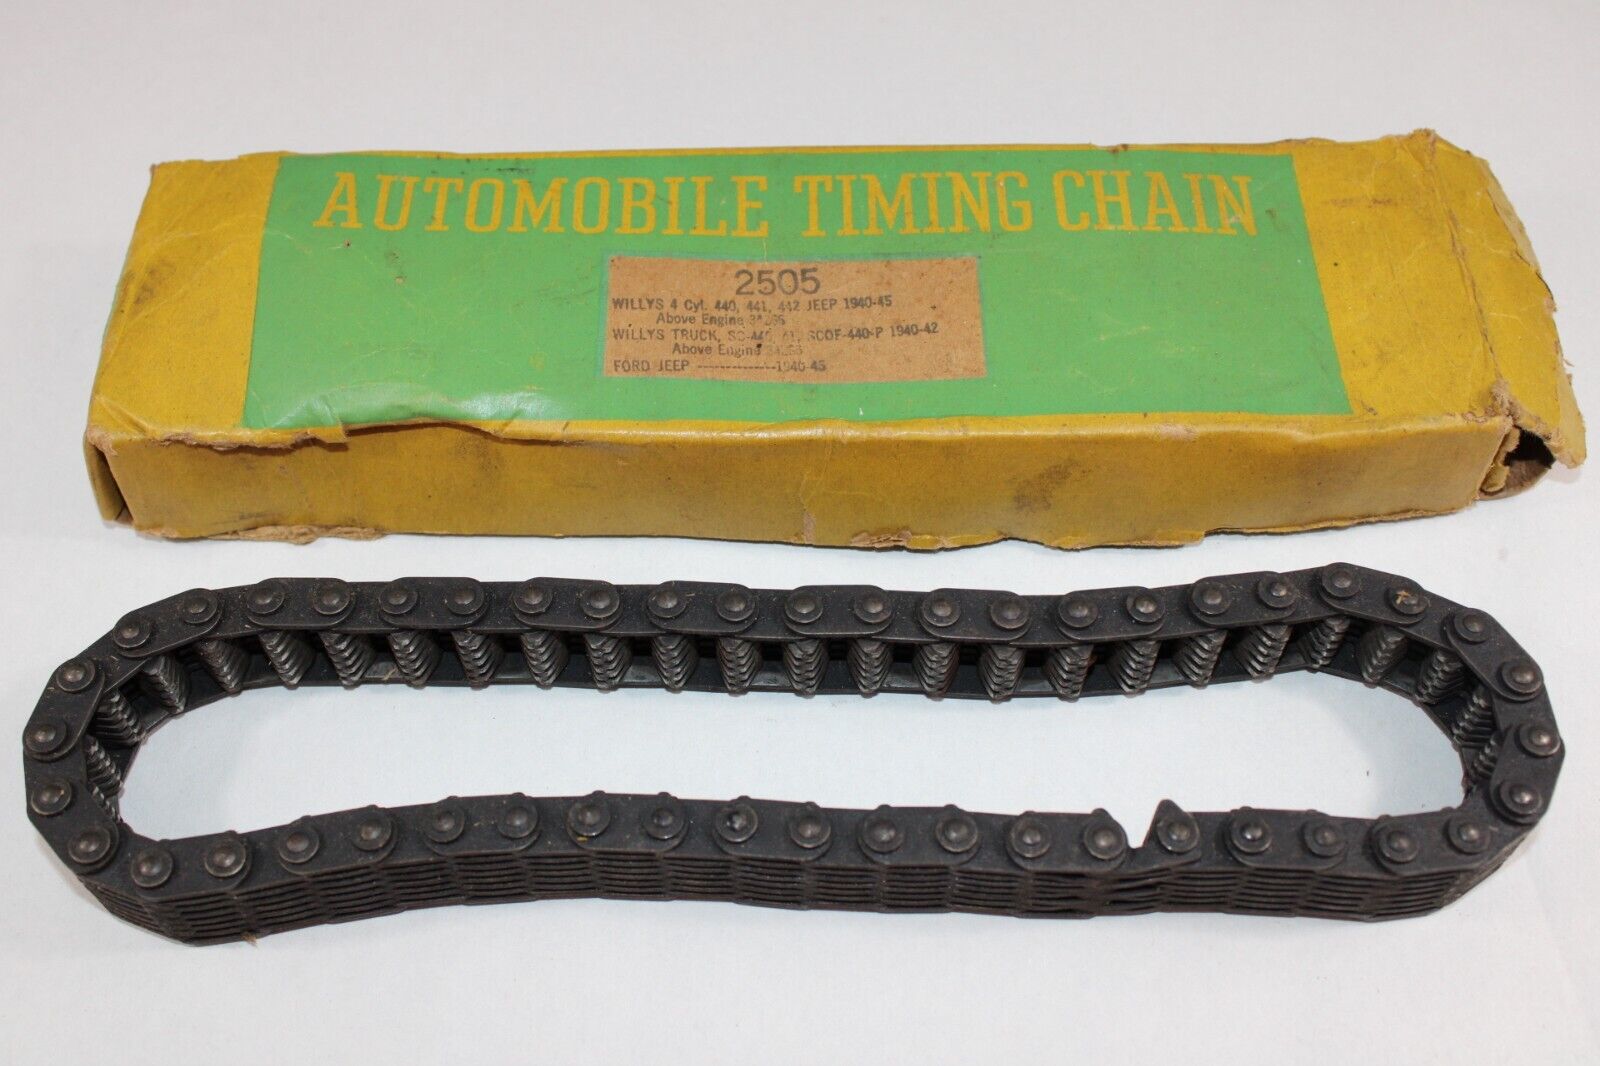 Automobile Timing Chain 2505 Willys Ford Jeep WWII US Army with Box